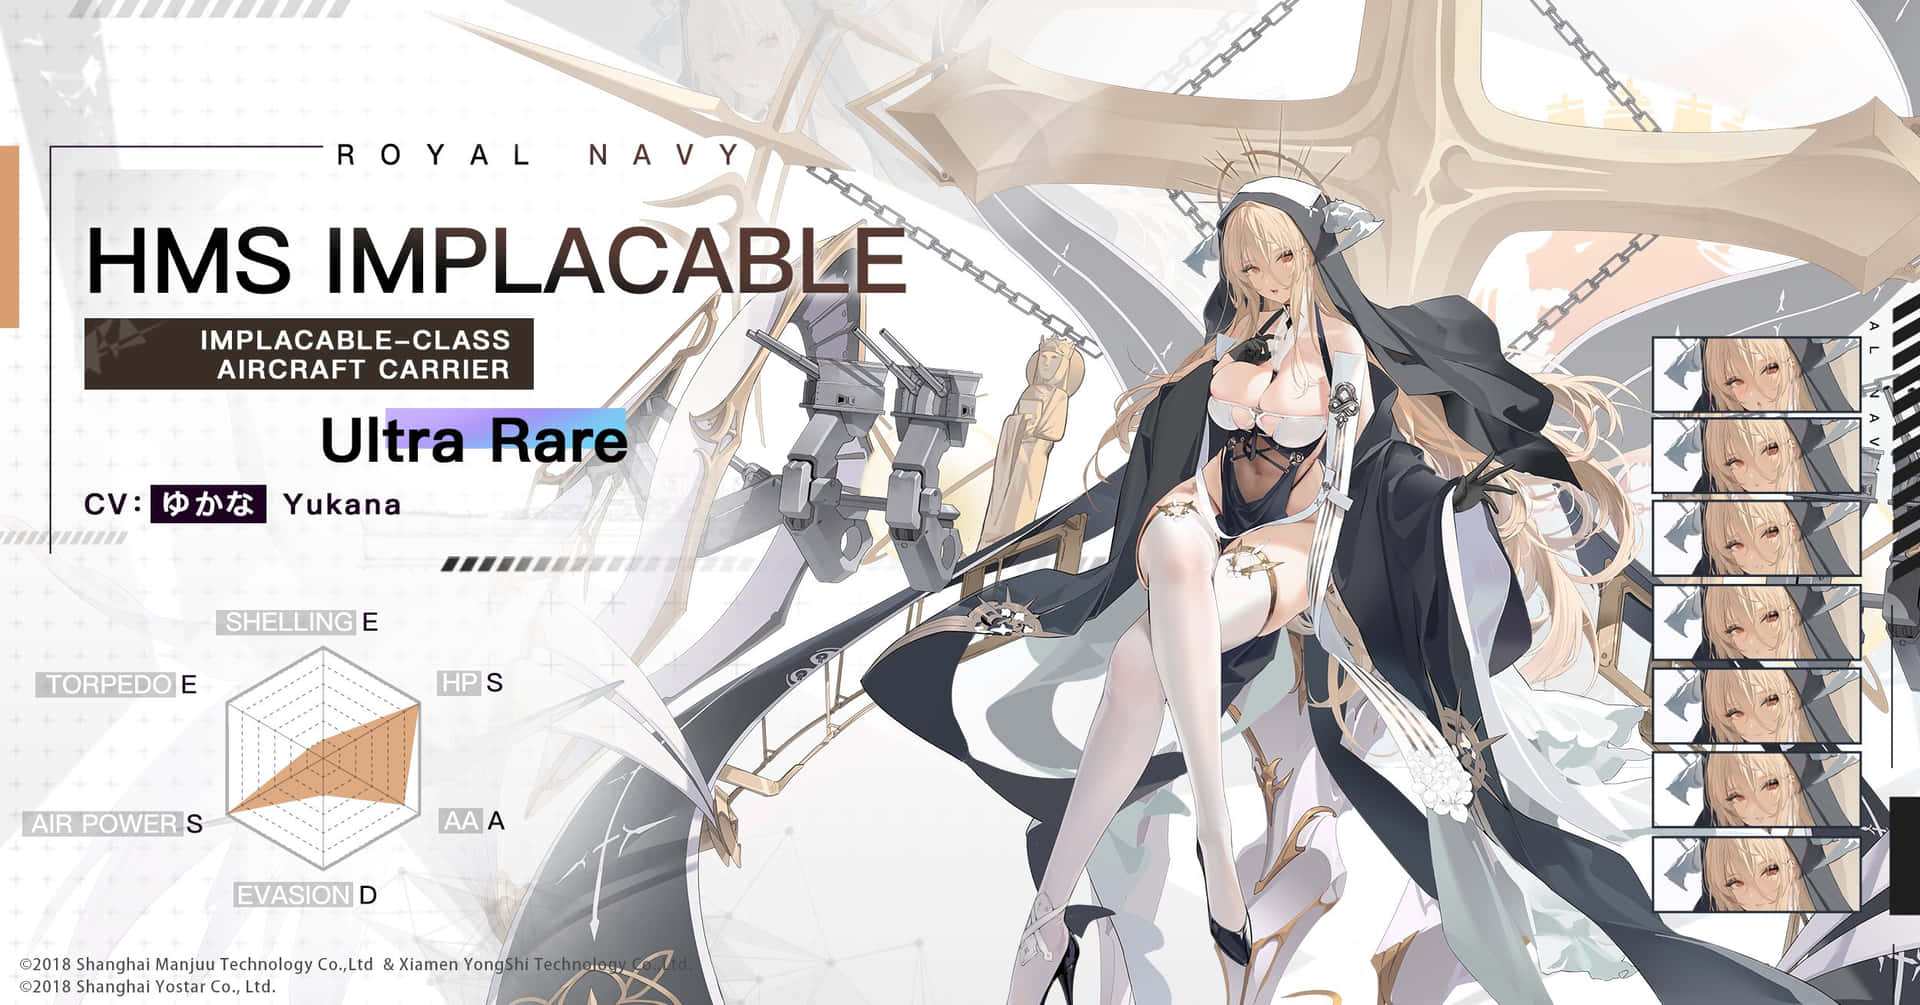 Lead the Fleet to Victory with the Heroines of Azur Lane